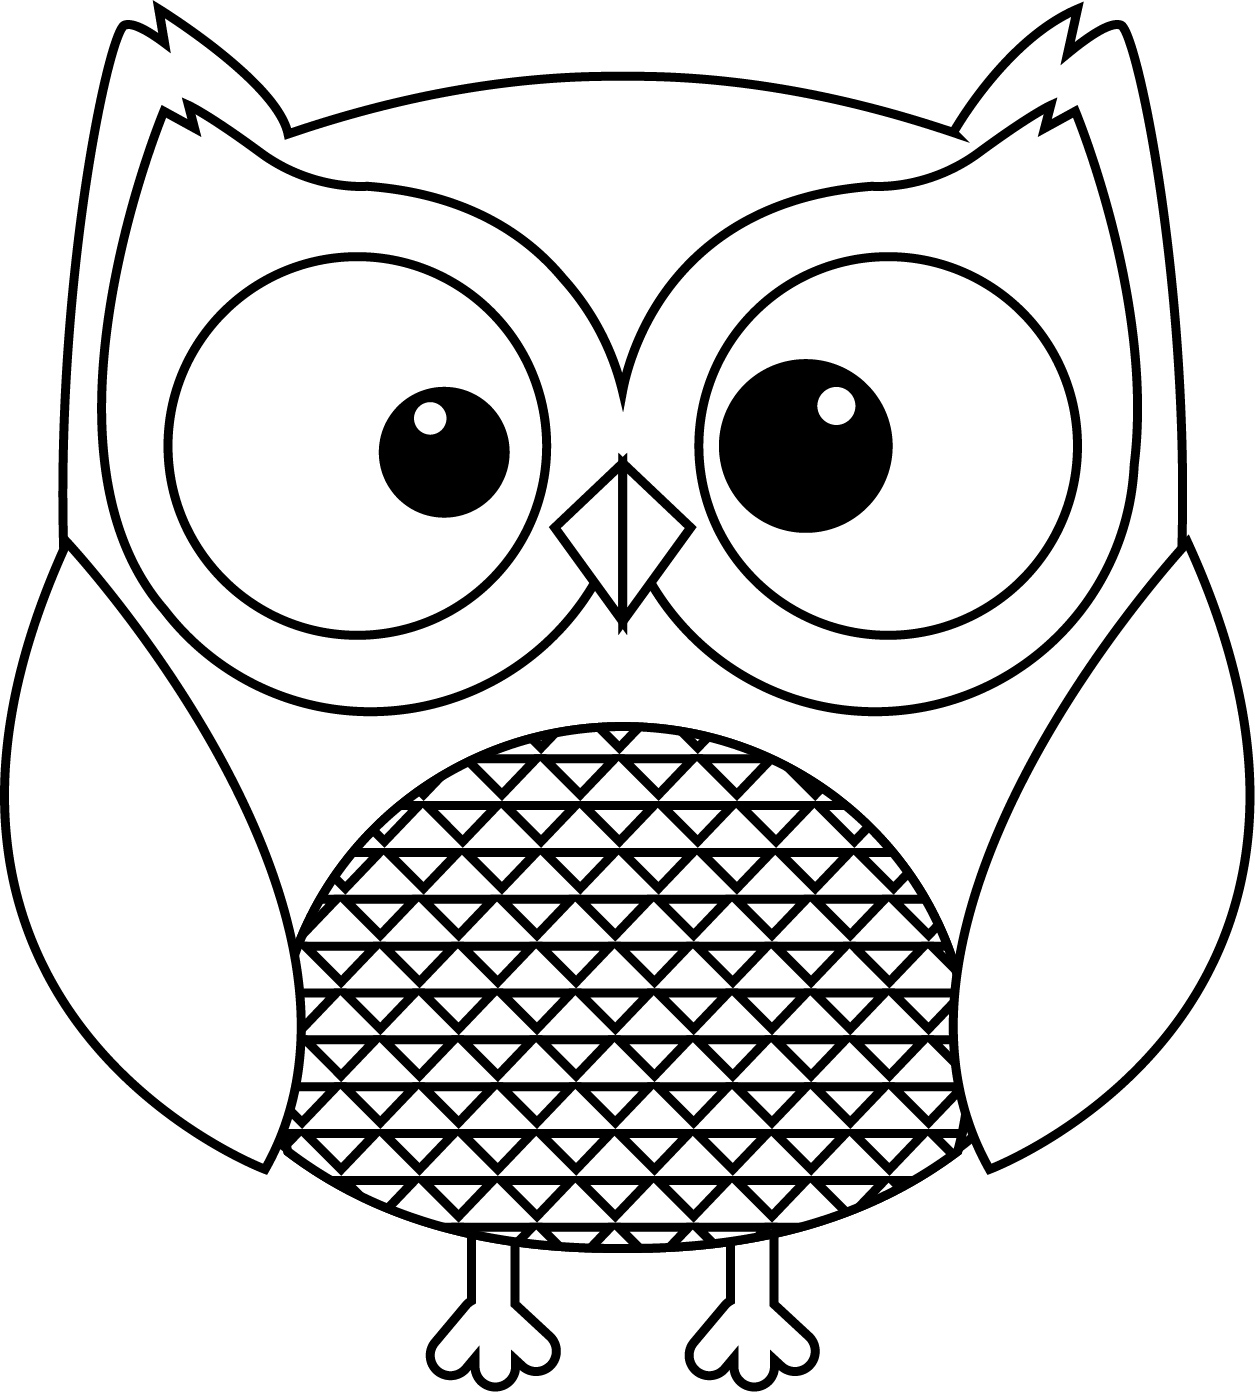 Crazy Animal Coloring Pages at GetColorings.com   Free printable ...